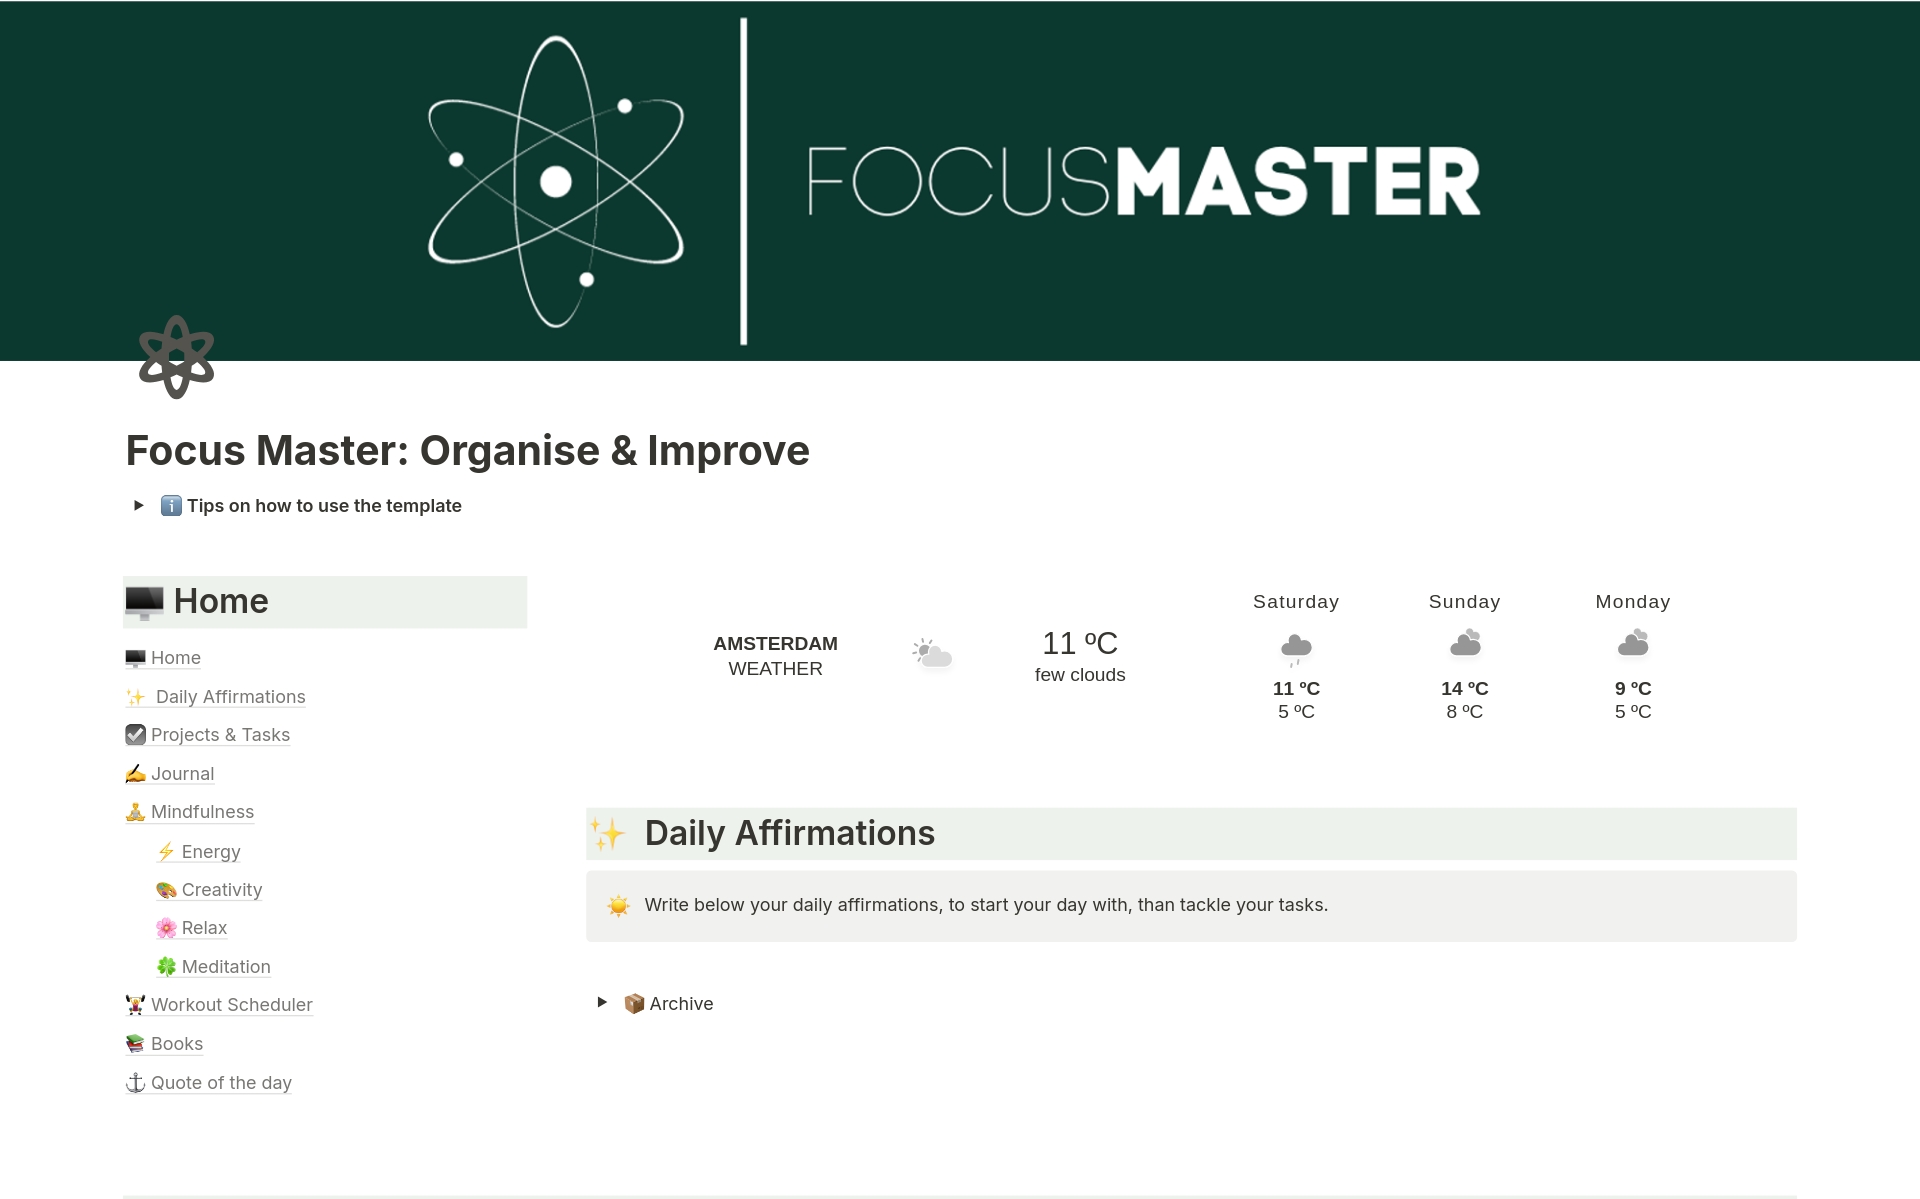 Meet FocusMaster, the revolutionary Notion template designed for the meticulous planner and the spontaneous creative alike. With FocusMaster, your days of juggling tasks, notes, and wellness habits are over.